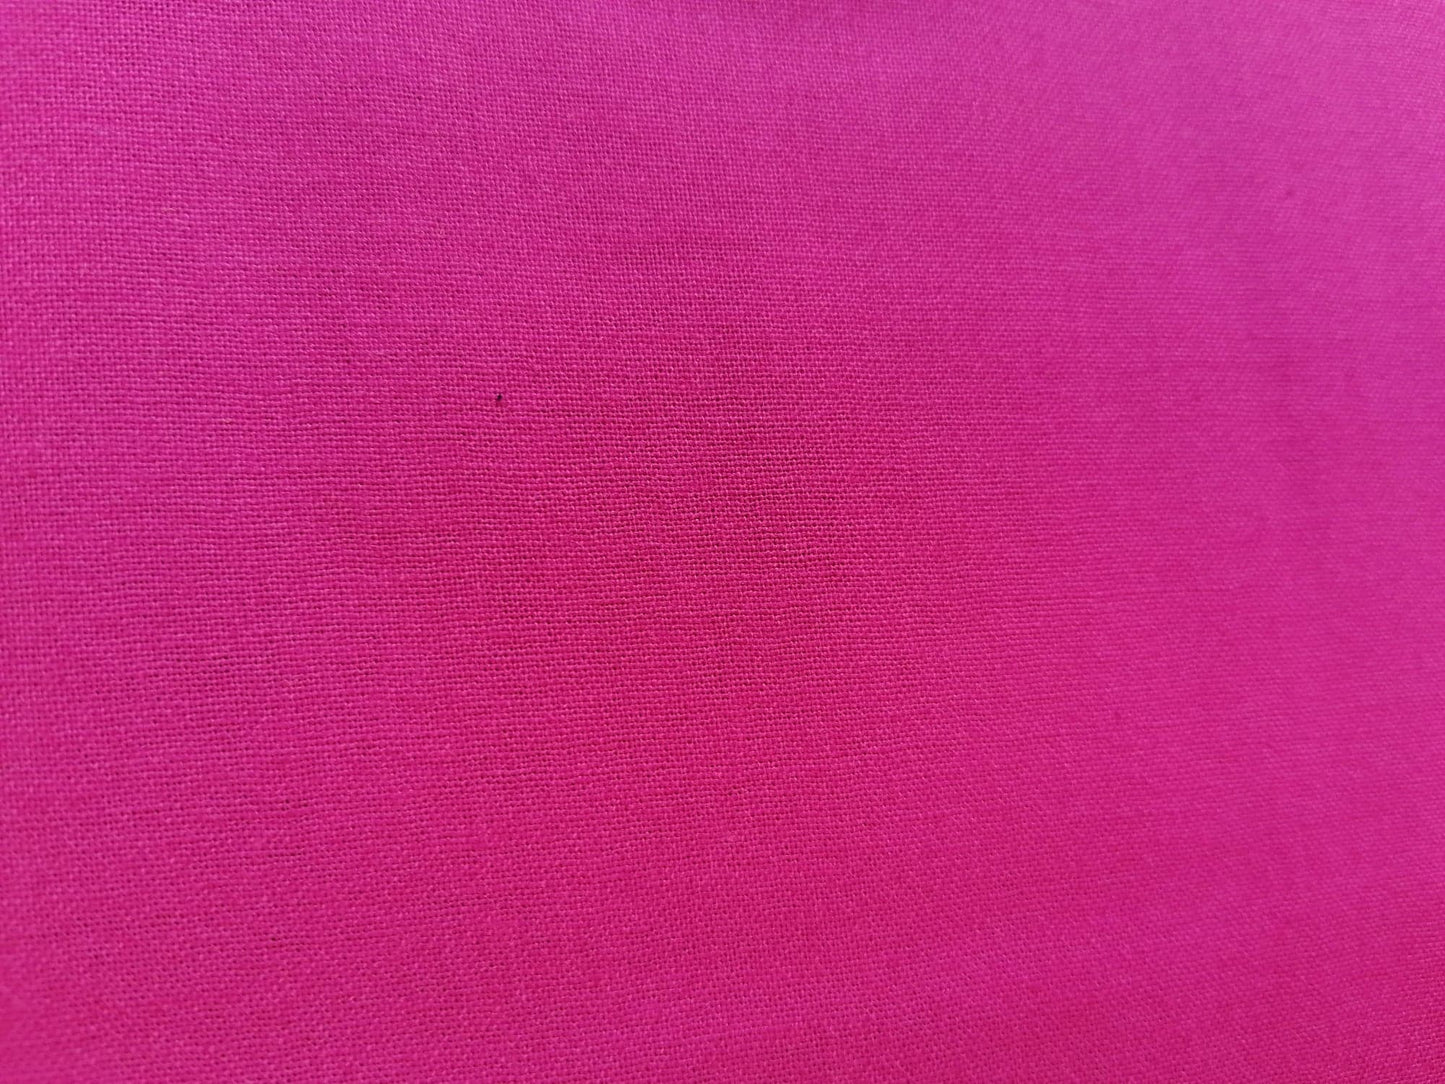 100% Cotton - Crafting & Quilting -  Dark Pink - 44" Wide - Sold By the Metre